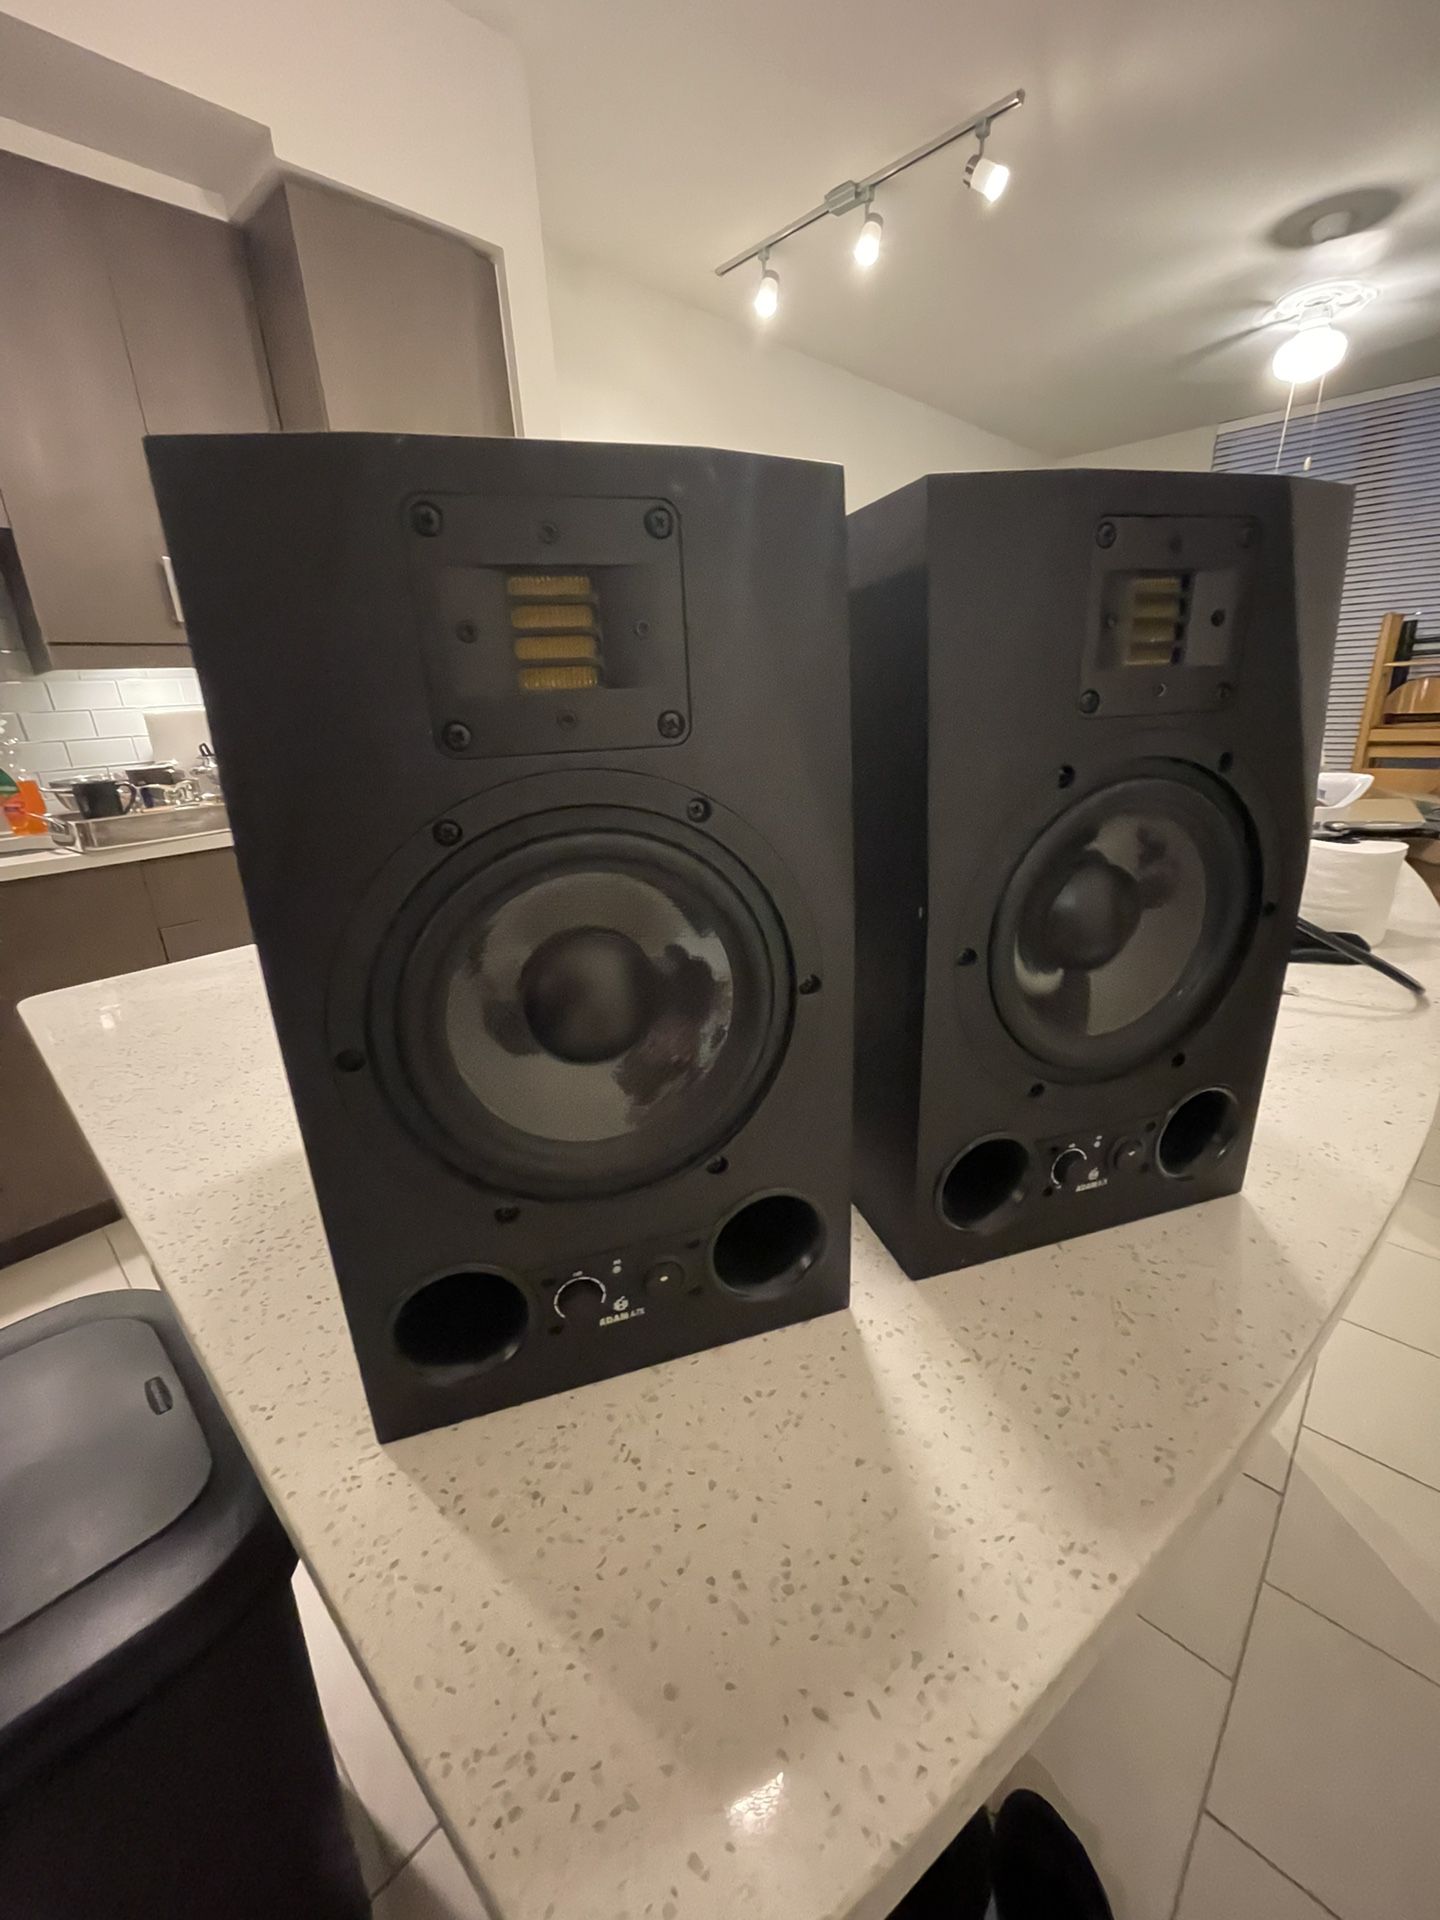 A7X7 Powered Studio Monitors (pair) For Sale! Mint / New Condition Excellent Price! One Speaker Alone Is Valued At $700, It’s A Great Deal!